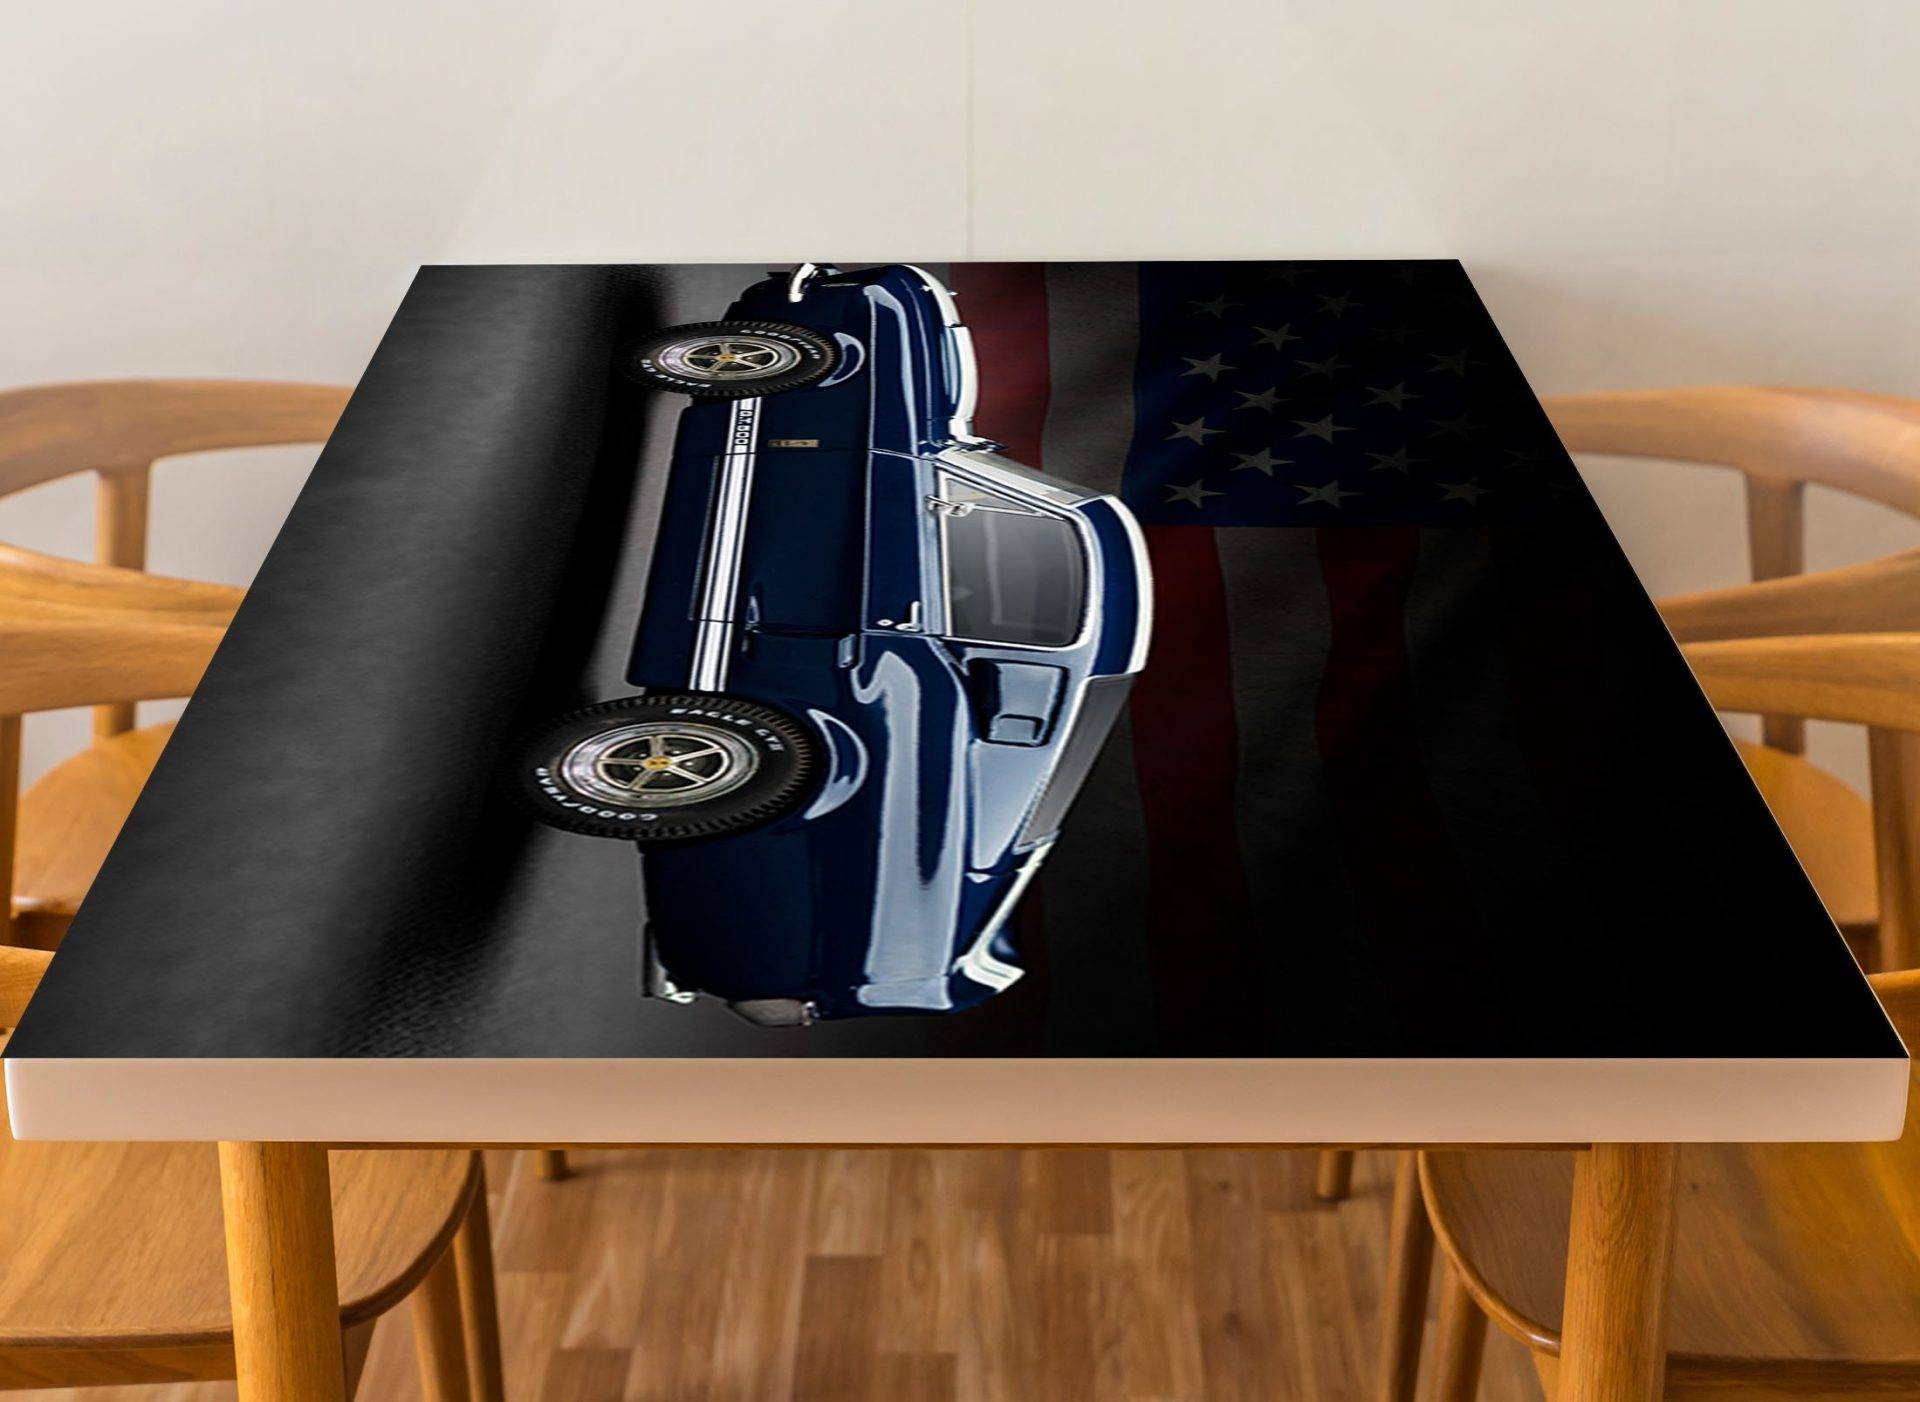 Mustang Blue Car Laminated Vinyl Cover Self-Adhesive for Desk and Tables